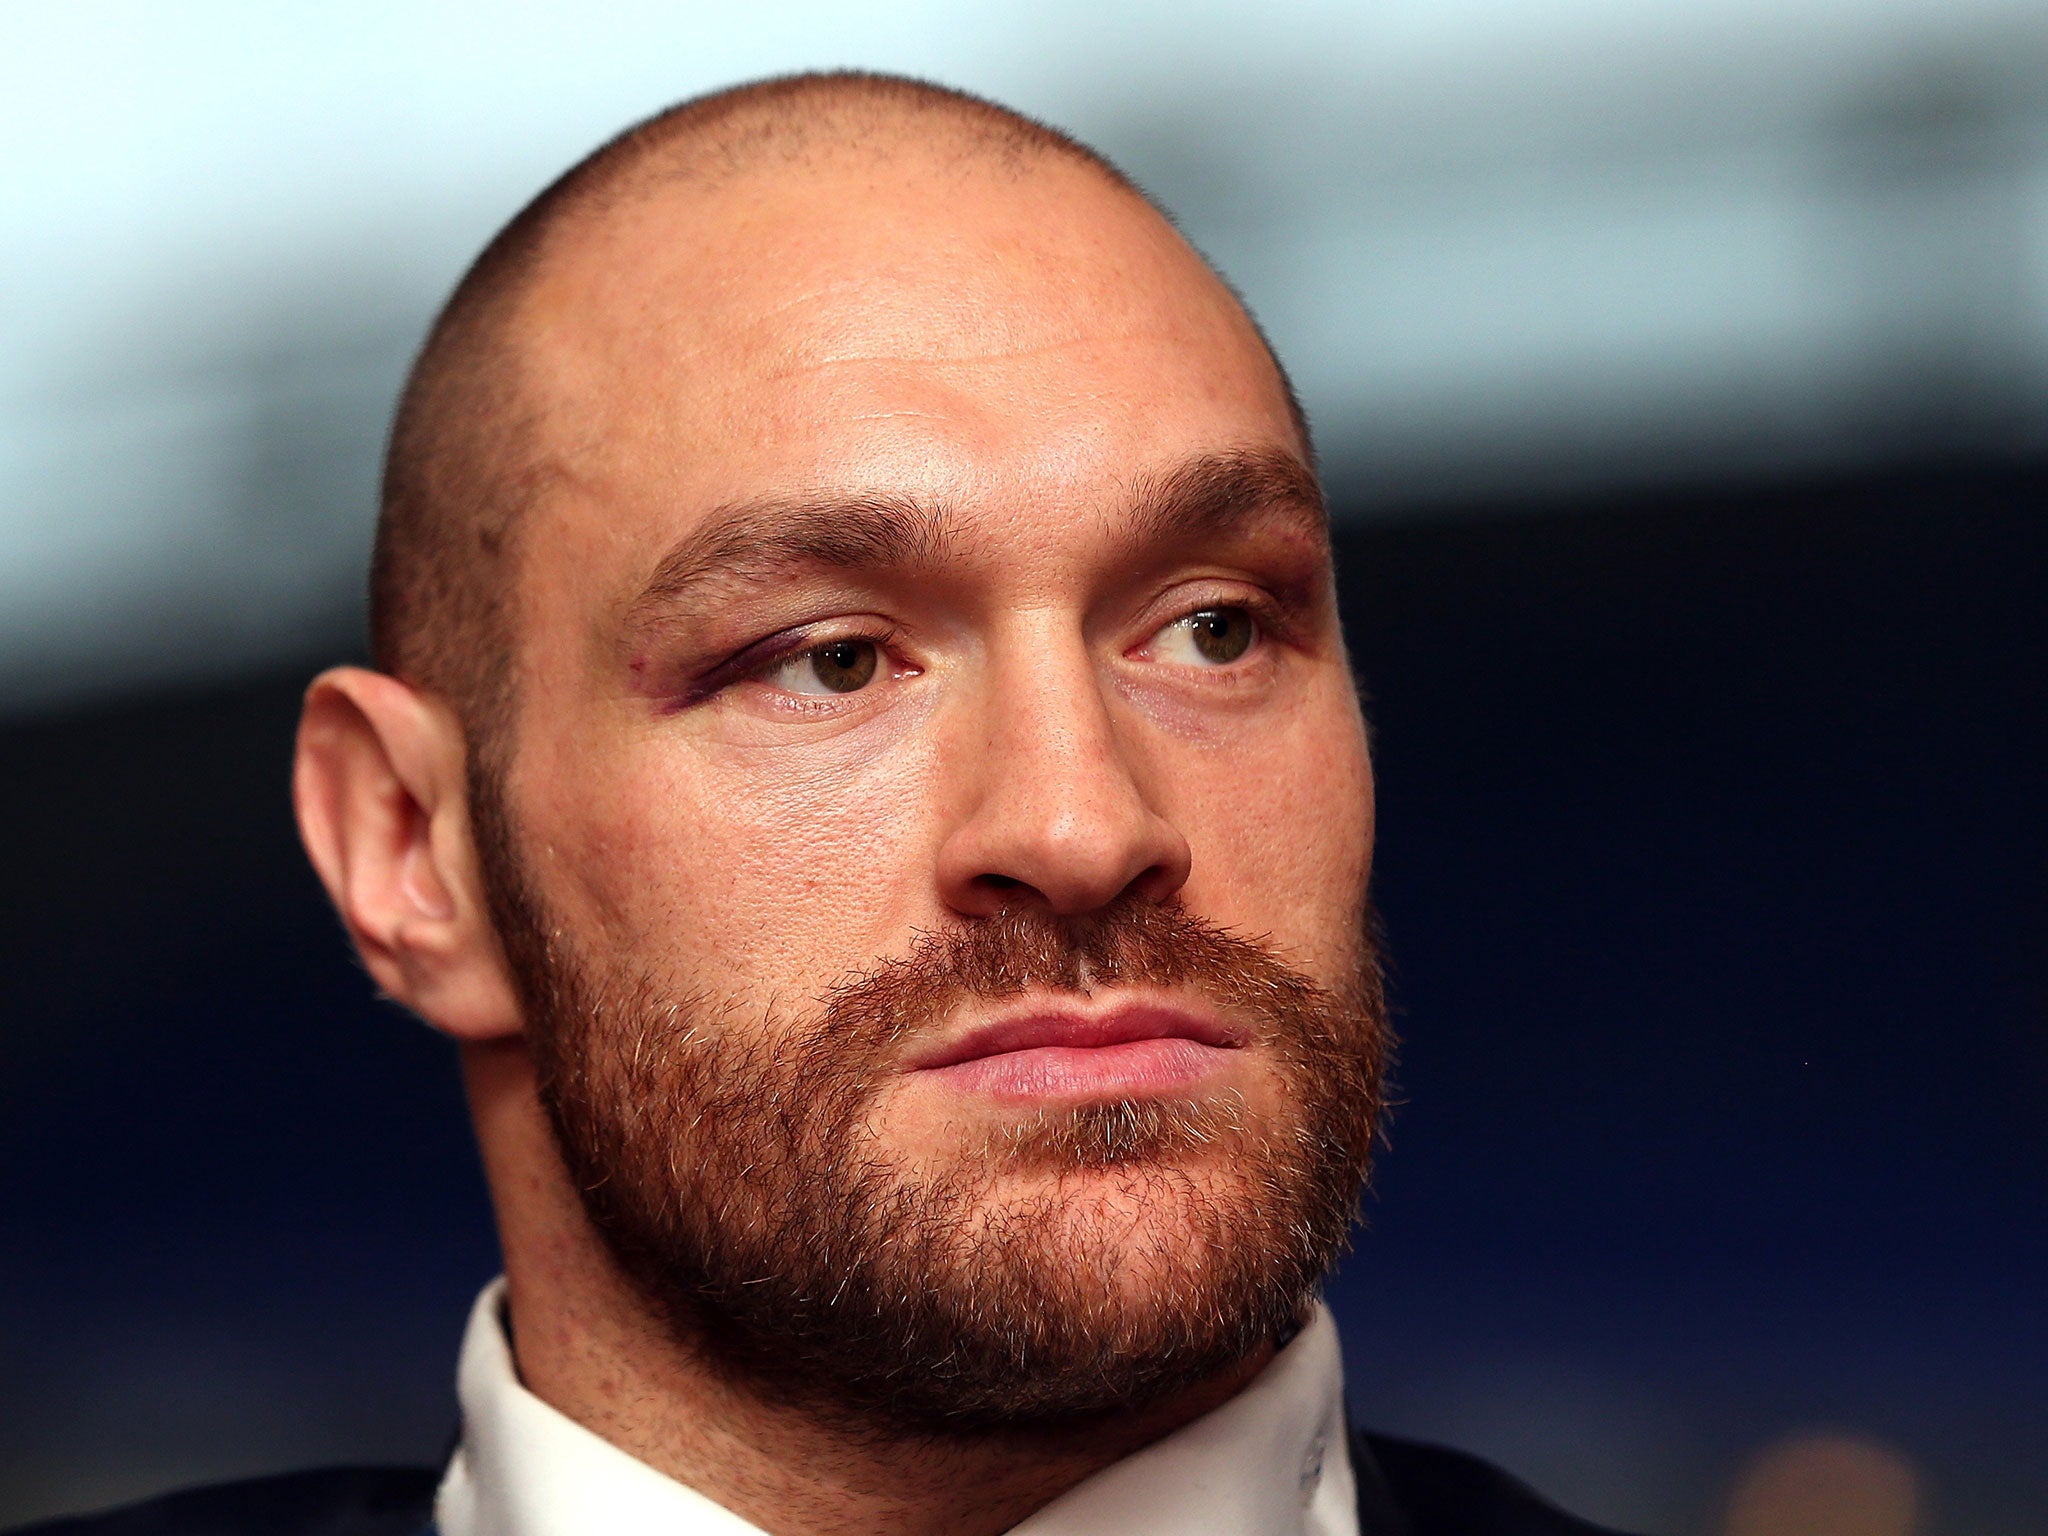 Tyson Fury could lose his license to fight